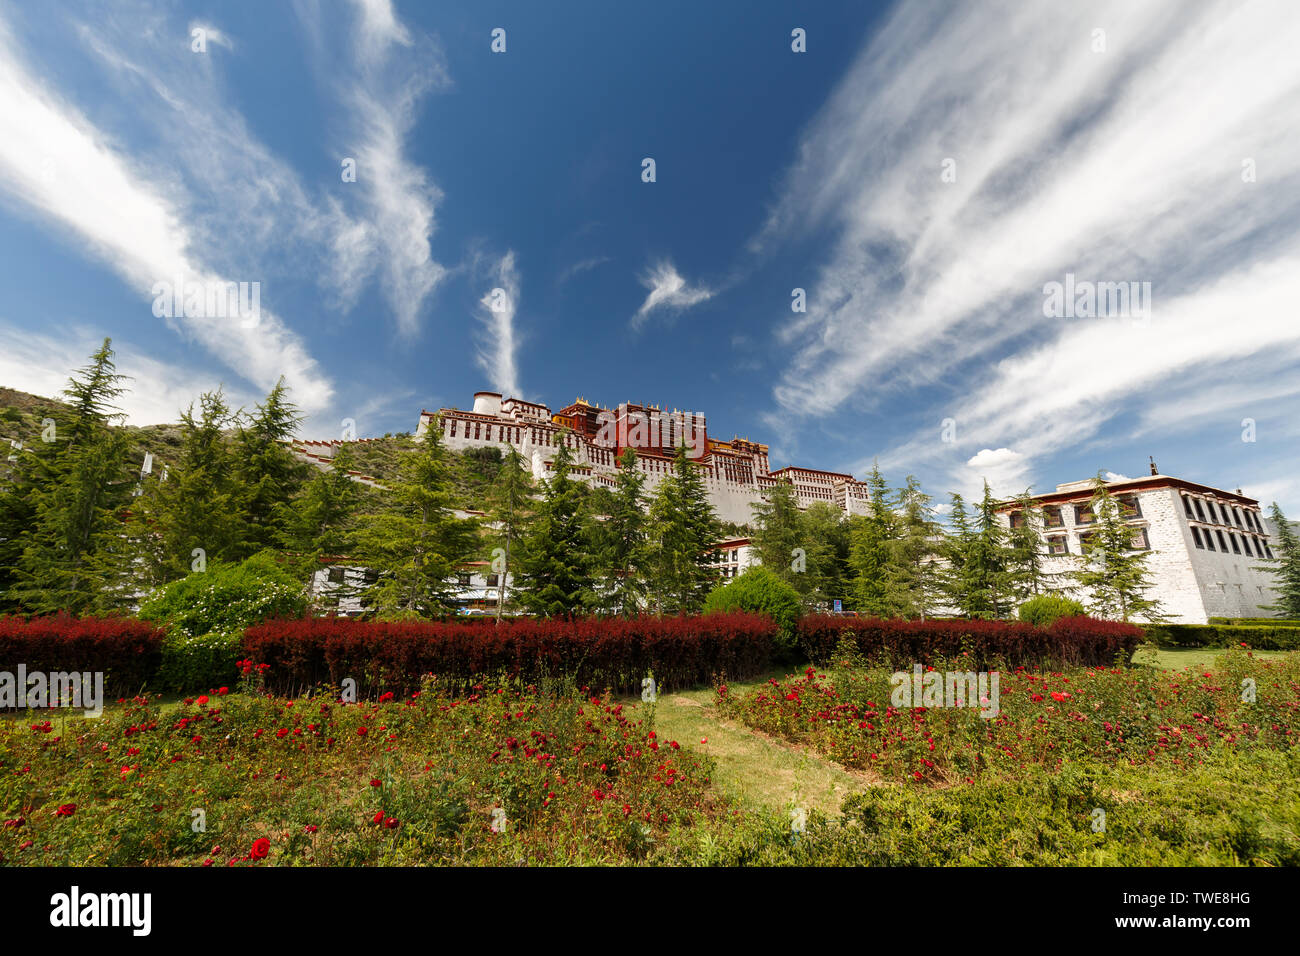 Side view on Potala Palace with blue sky, flower beds and cloudy sky. The construction of the palace was completed in 1648. Popular travel destination Stock Photo